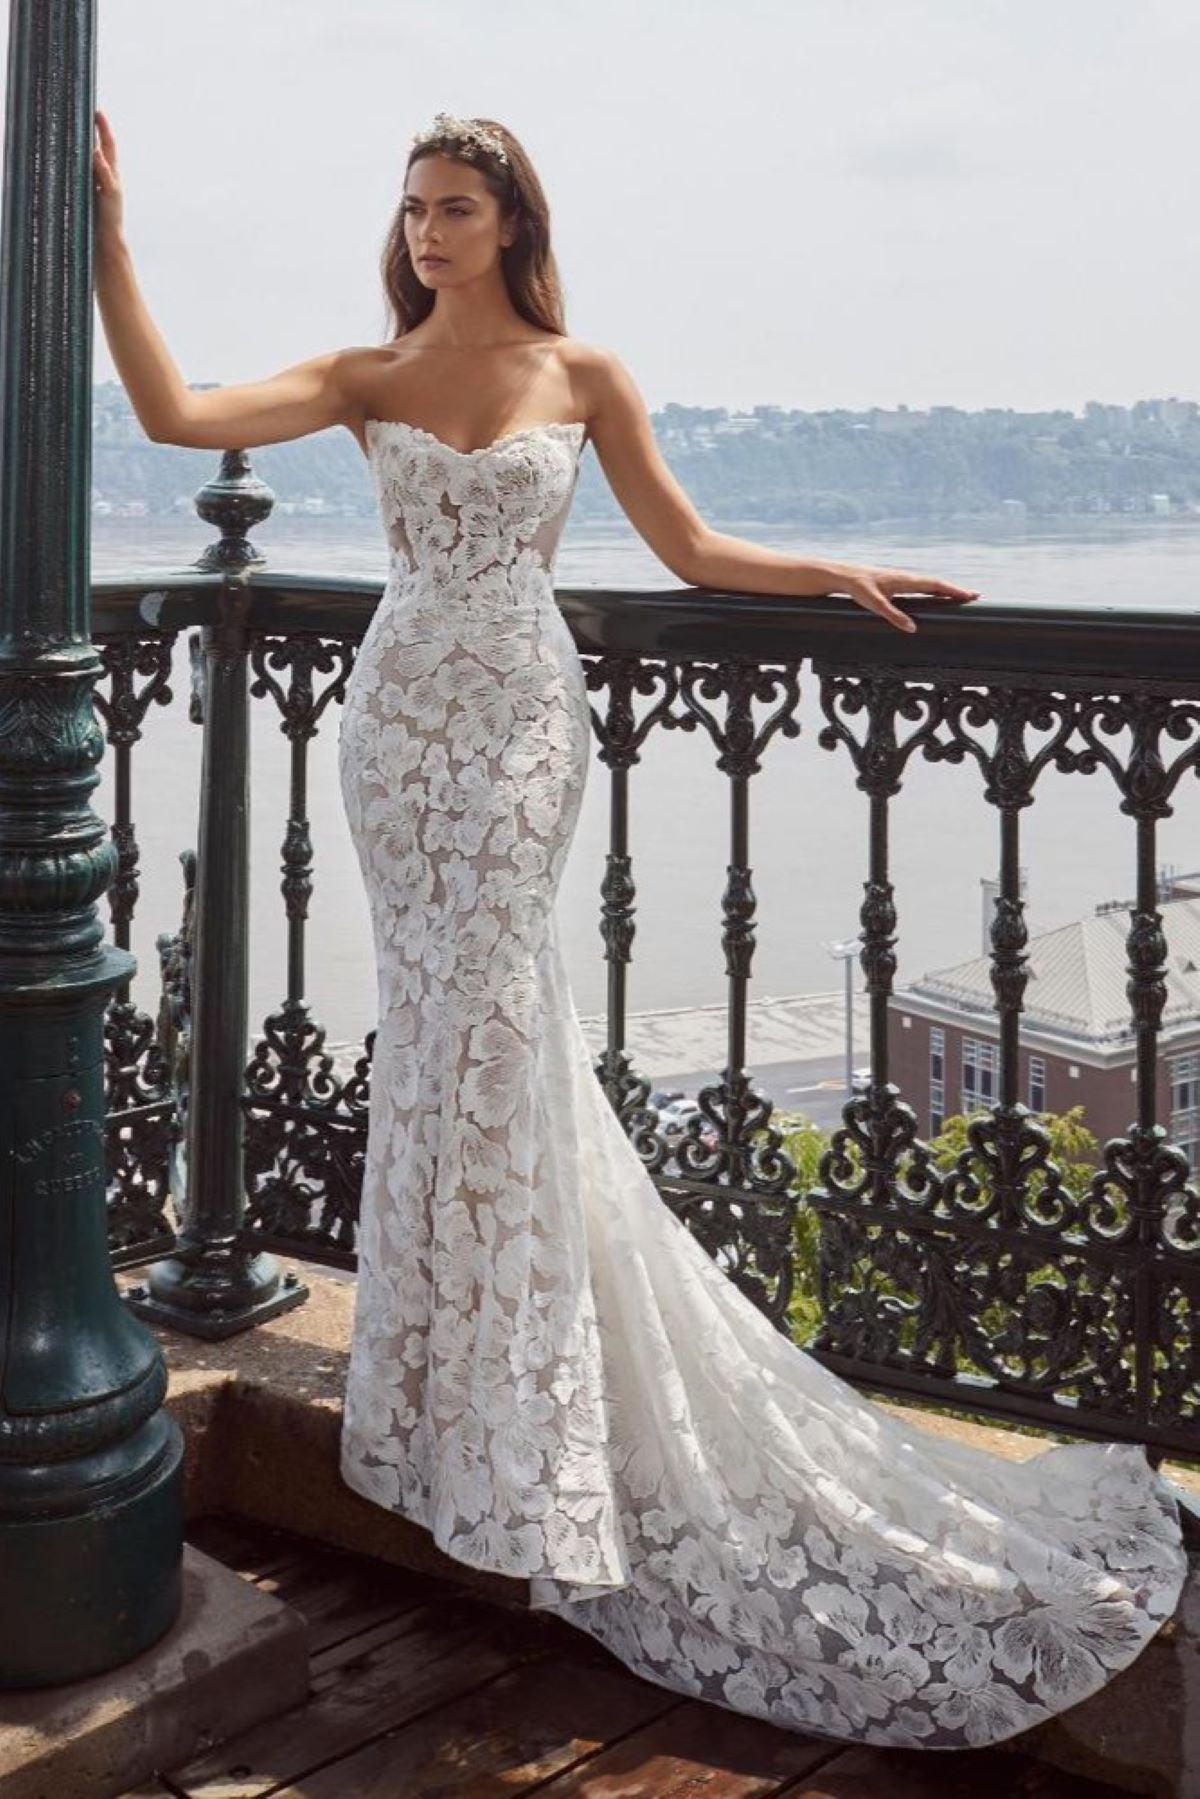 124108-Sexy Strapless Wedding Dress with Lace and Sweetheart Neckline2.jpg__PID:5fe081bd-0dd6-4808-ad2d-882191c5c4ca